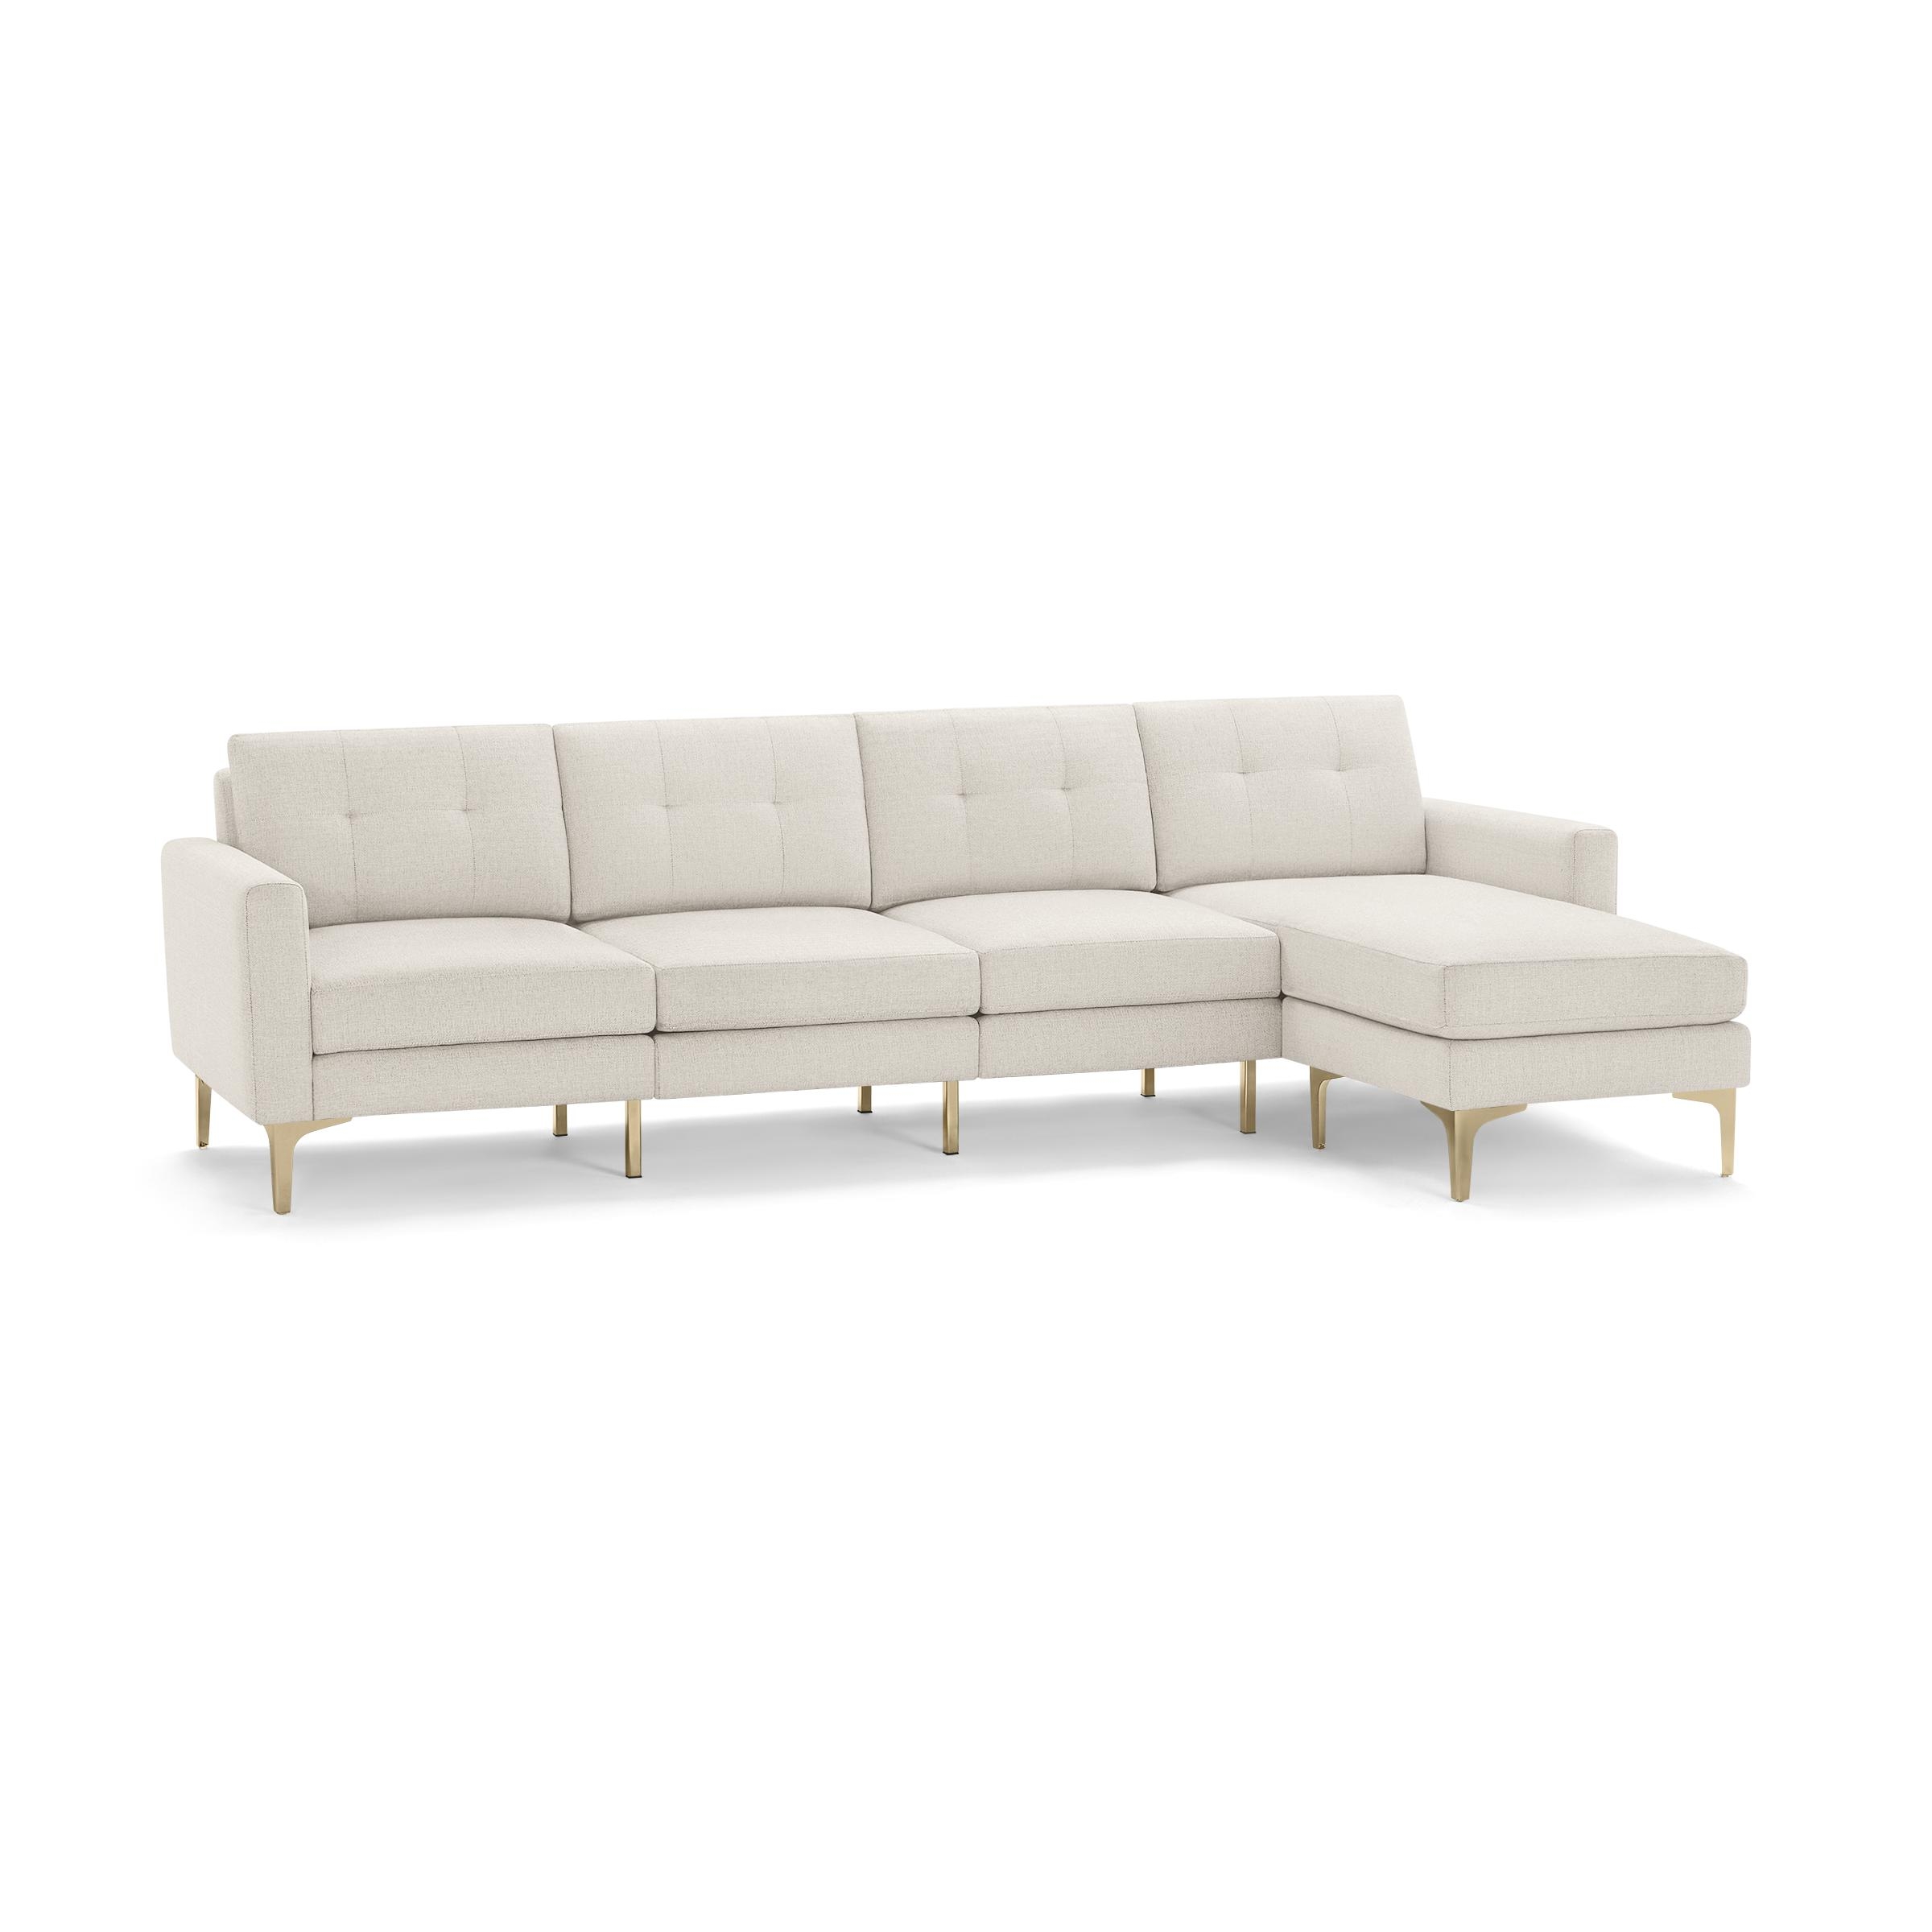 The Block Nomad King Sectional Sofa in Ivory - Image 1